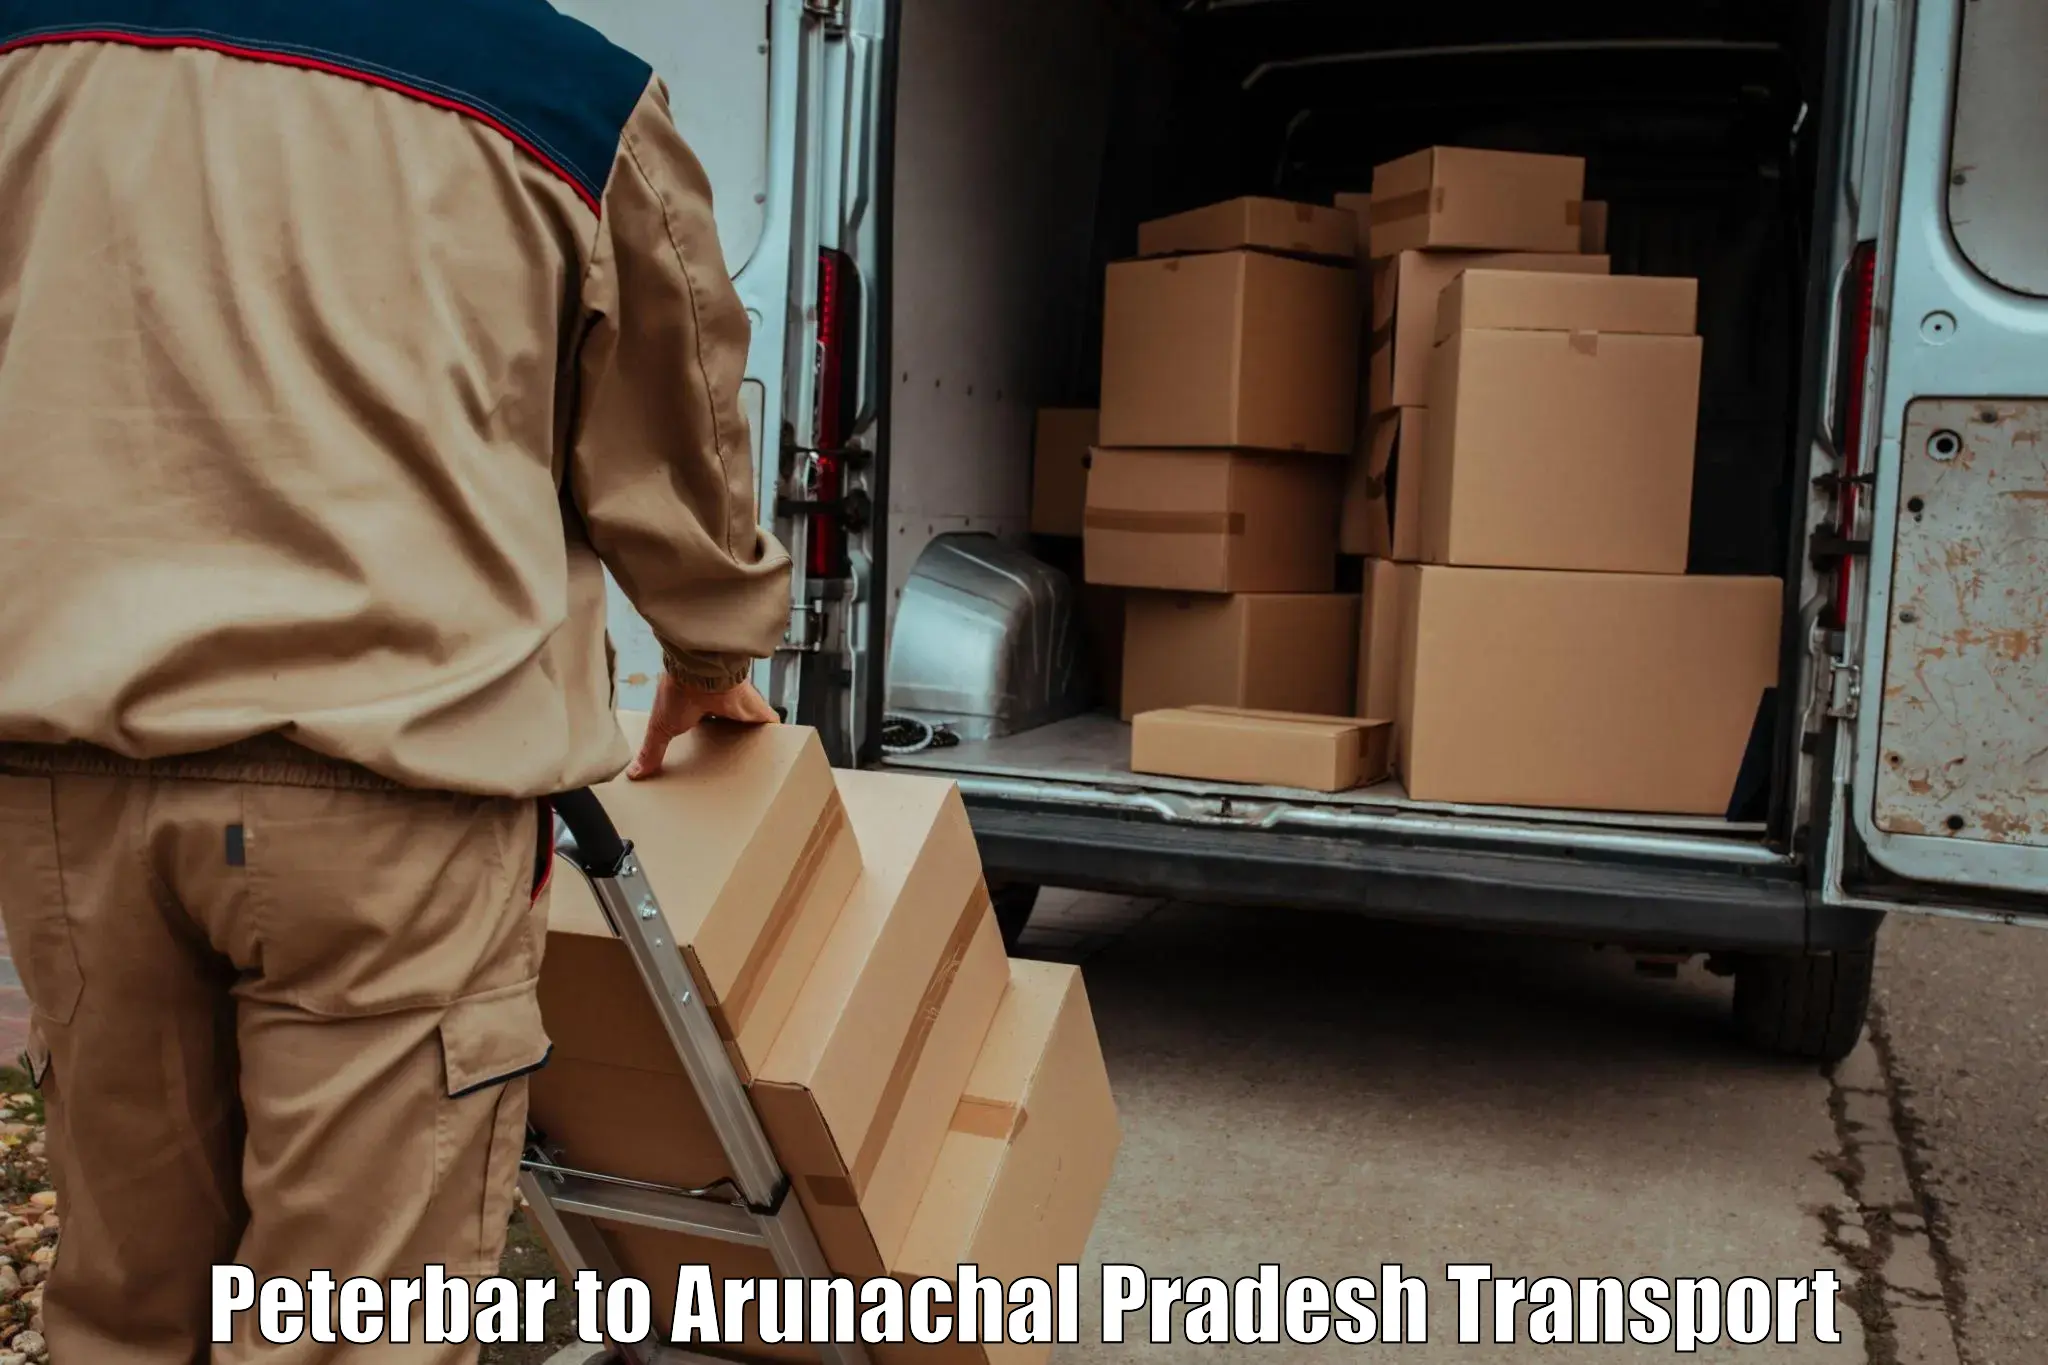 Parcel transport services in Peterbar to Bhalukpong